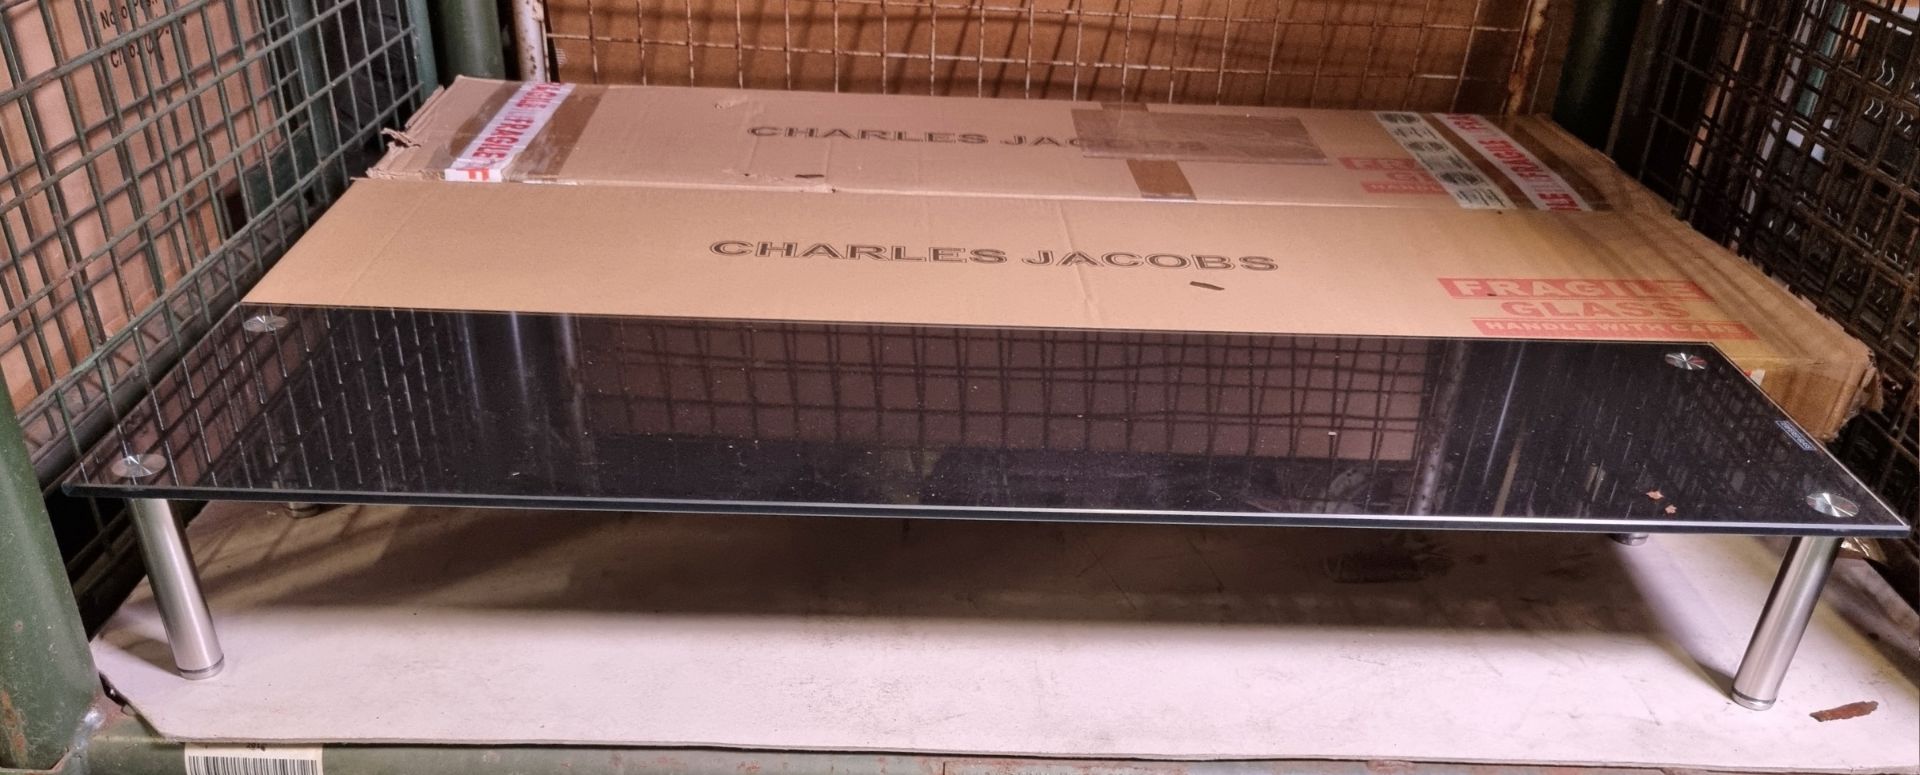 5x Charles Jacobs Glass topped monitor tables - W 1000 x D 260 x H 140 mm - Image 2 of 2